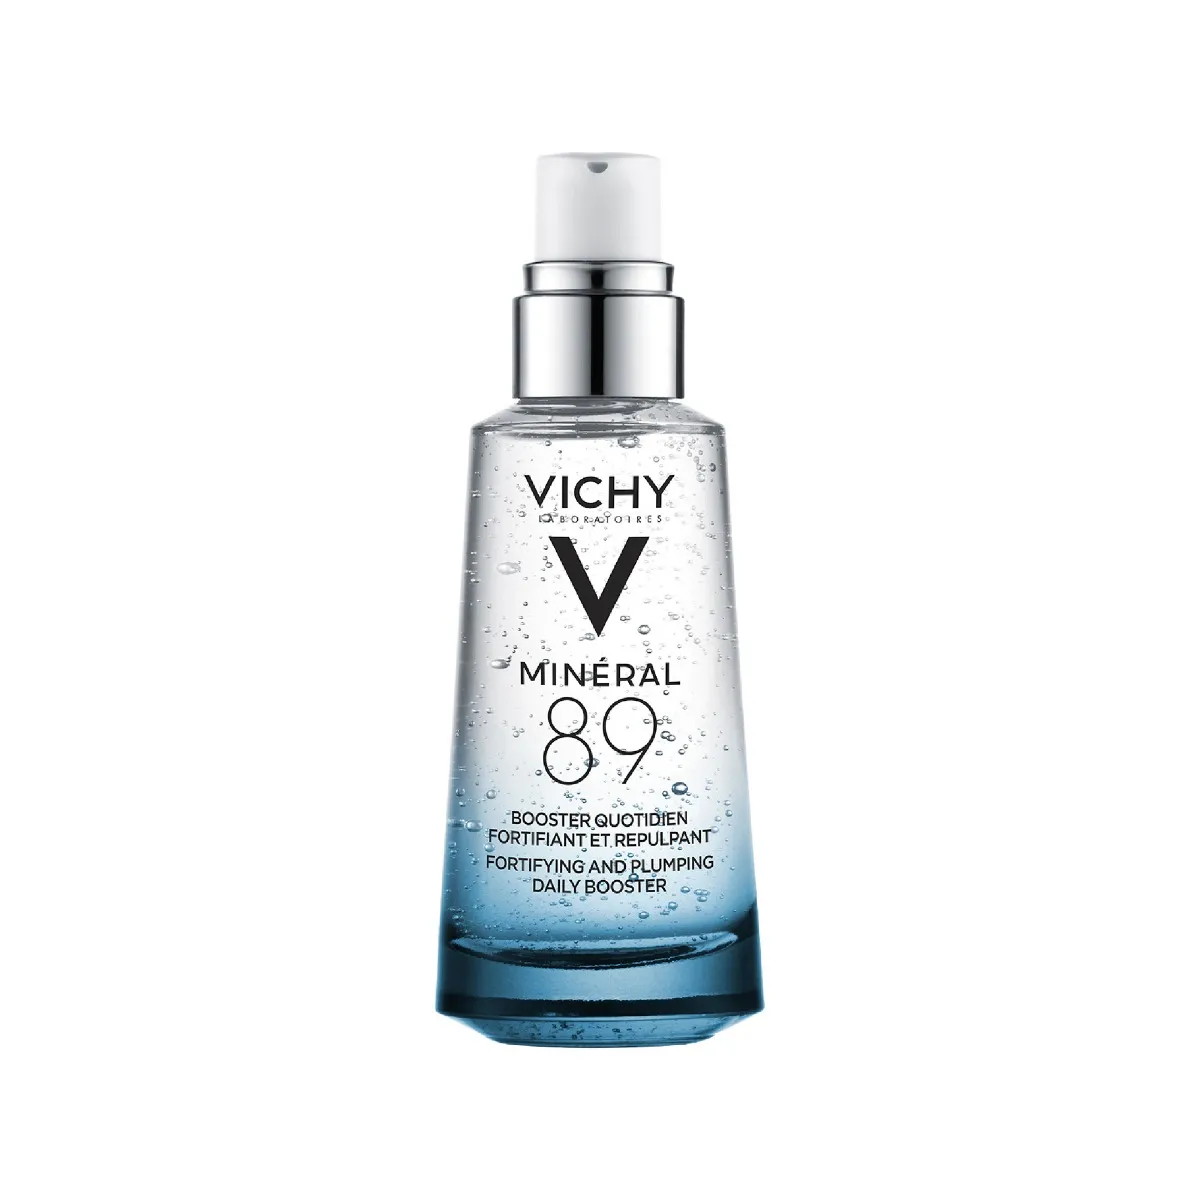 VICHY MINERAL 89 1×50 ml, hyaluron-booster